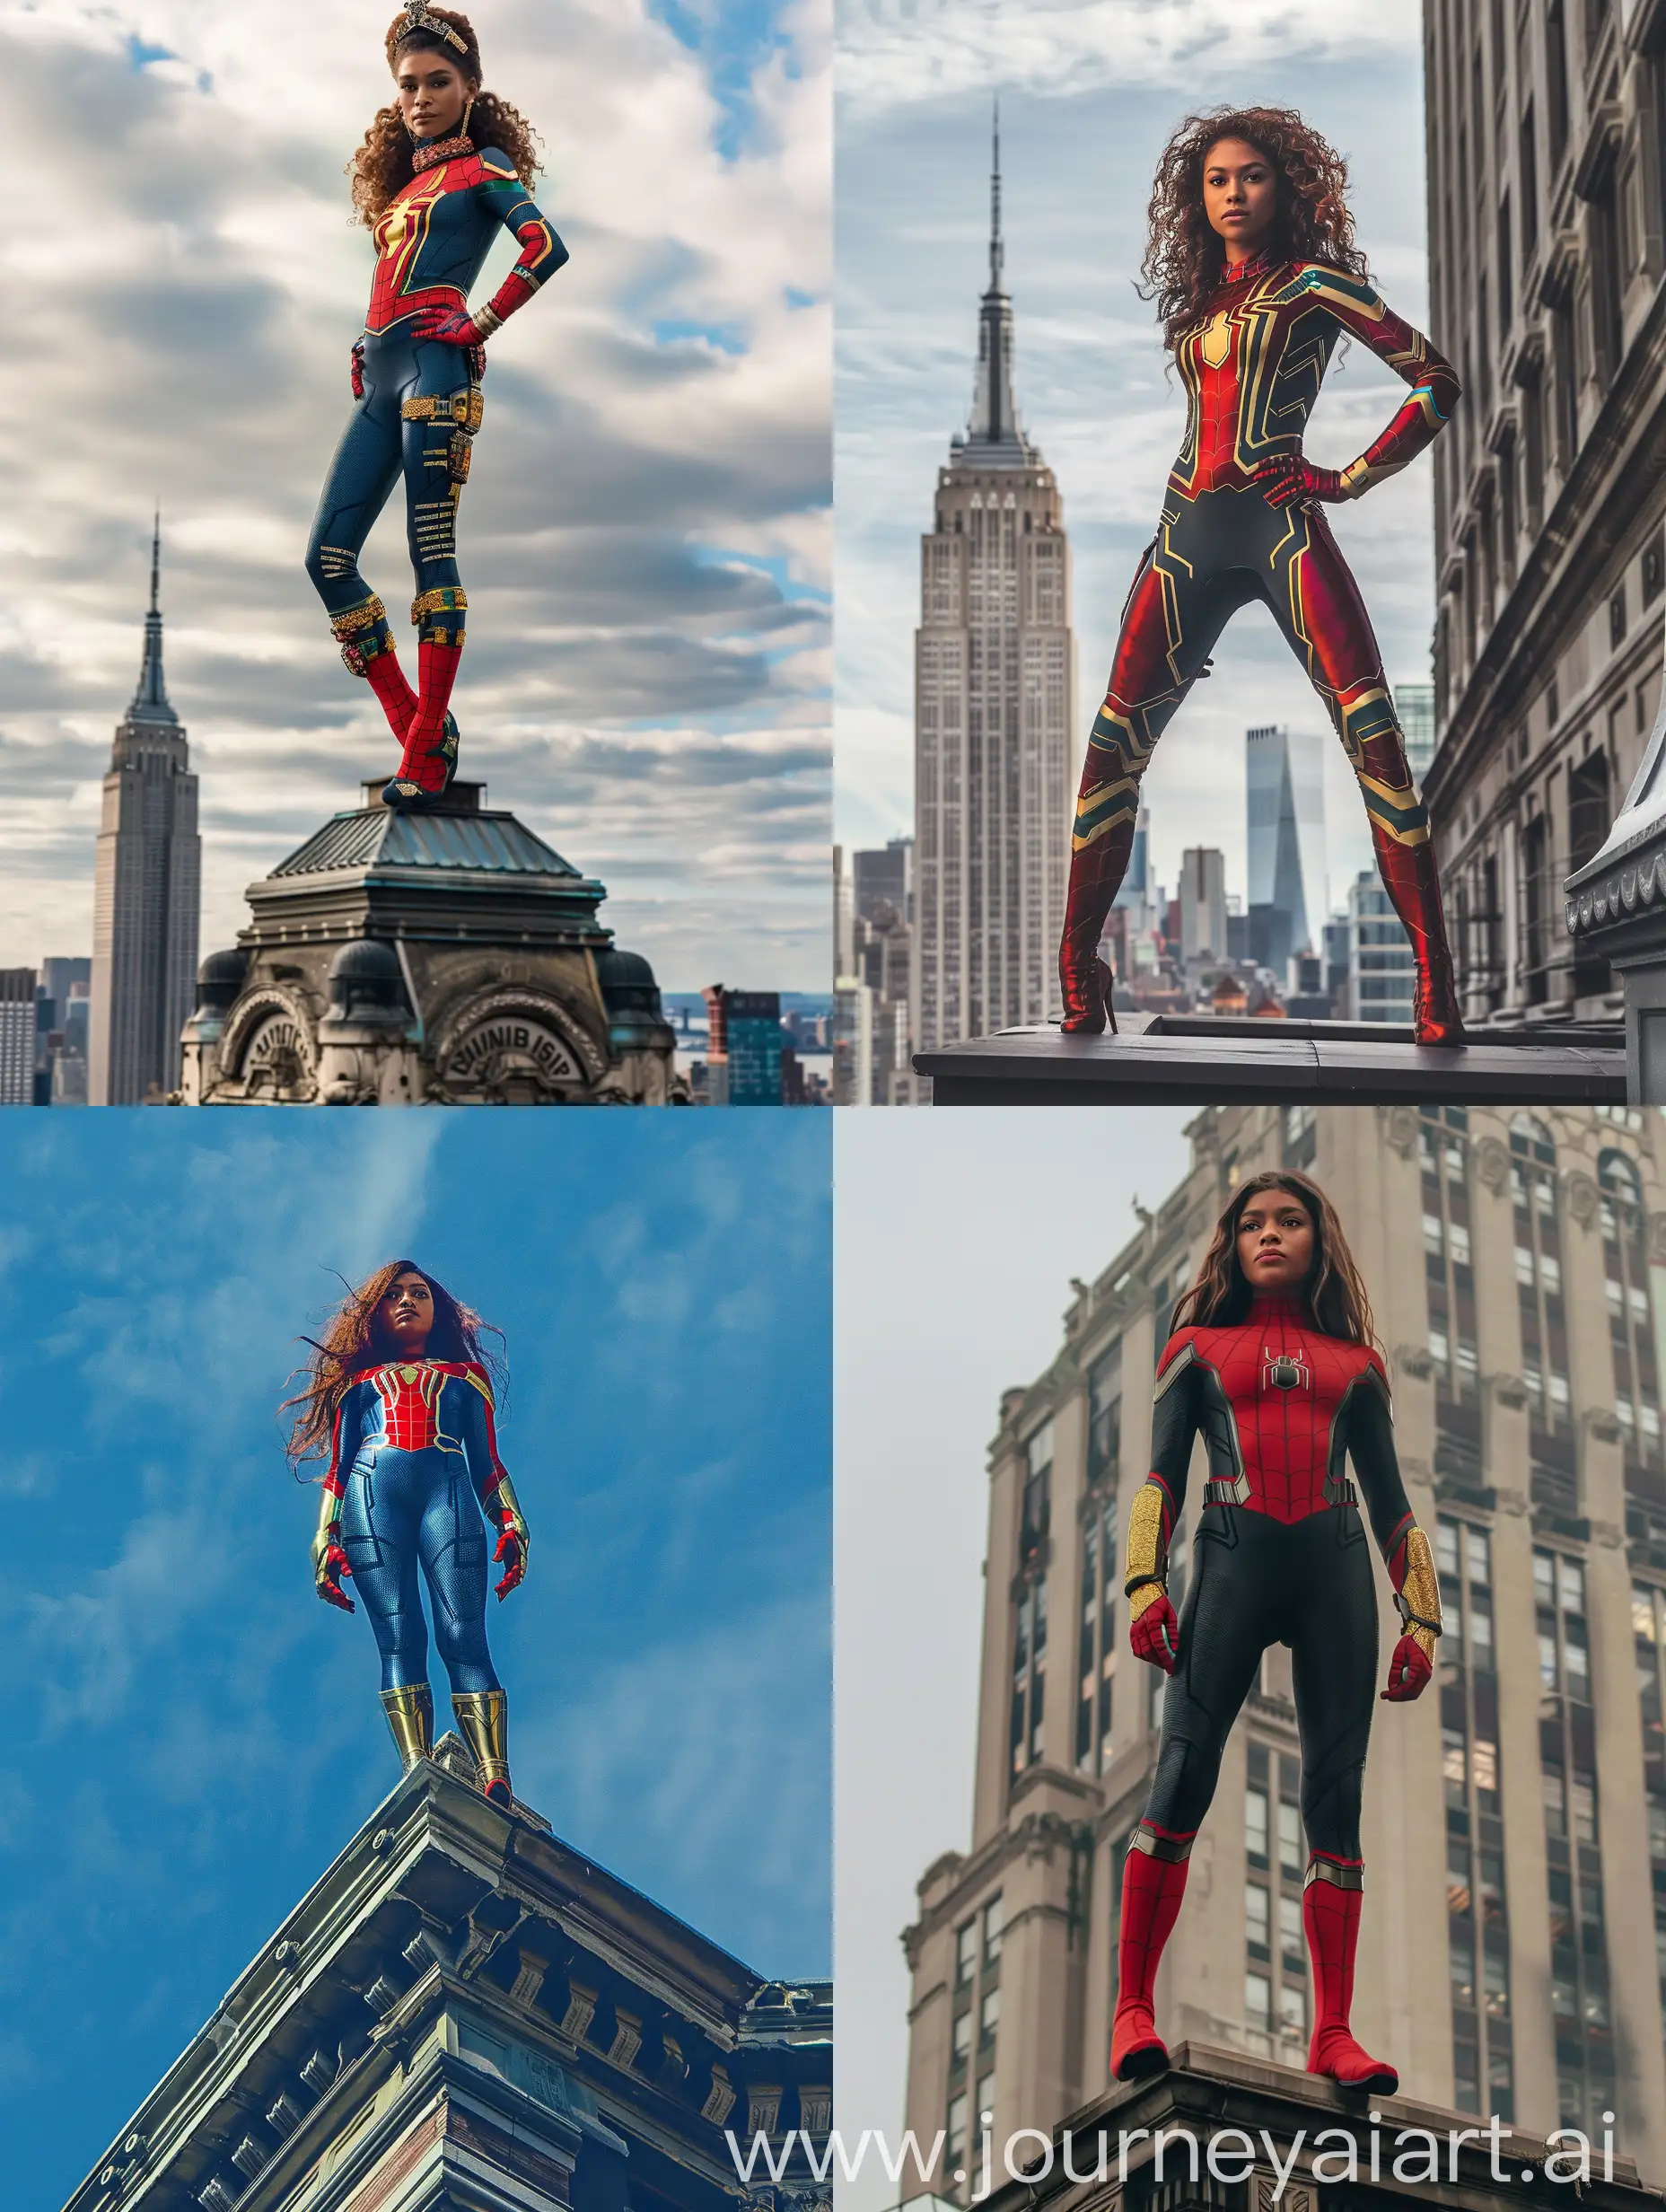 Zendaya as Spider-Girl, standing on top of a New York building